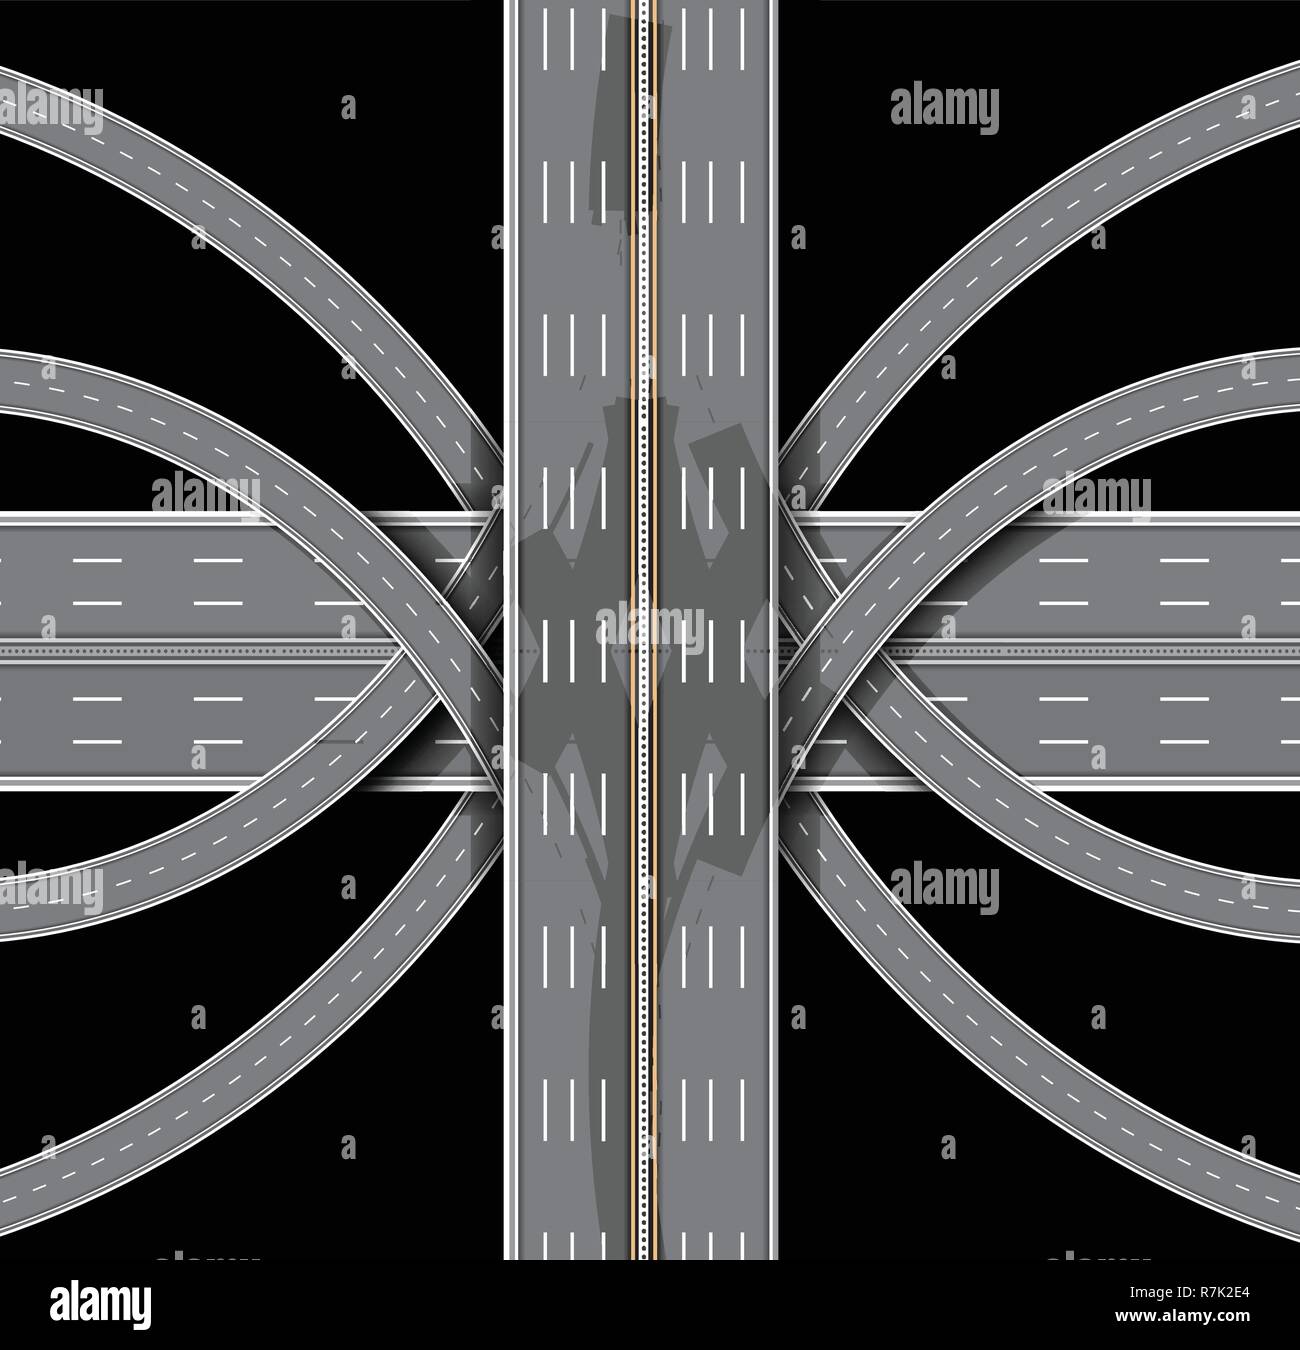 Car highway. Ring road, orbital road, beltline, beltway, loop on black background. The denouement of the many roads. Top view. Vector illustration Stock Vector